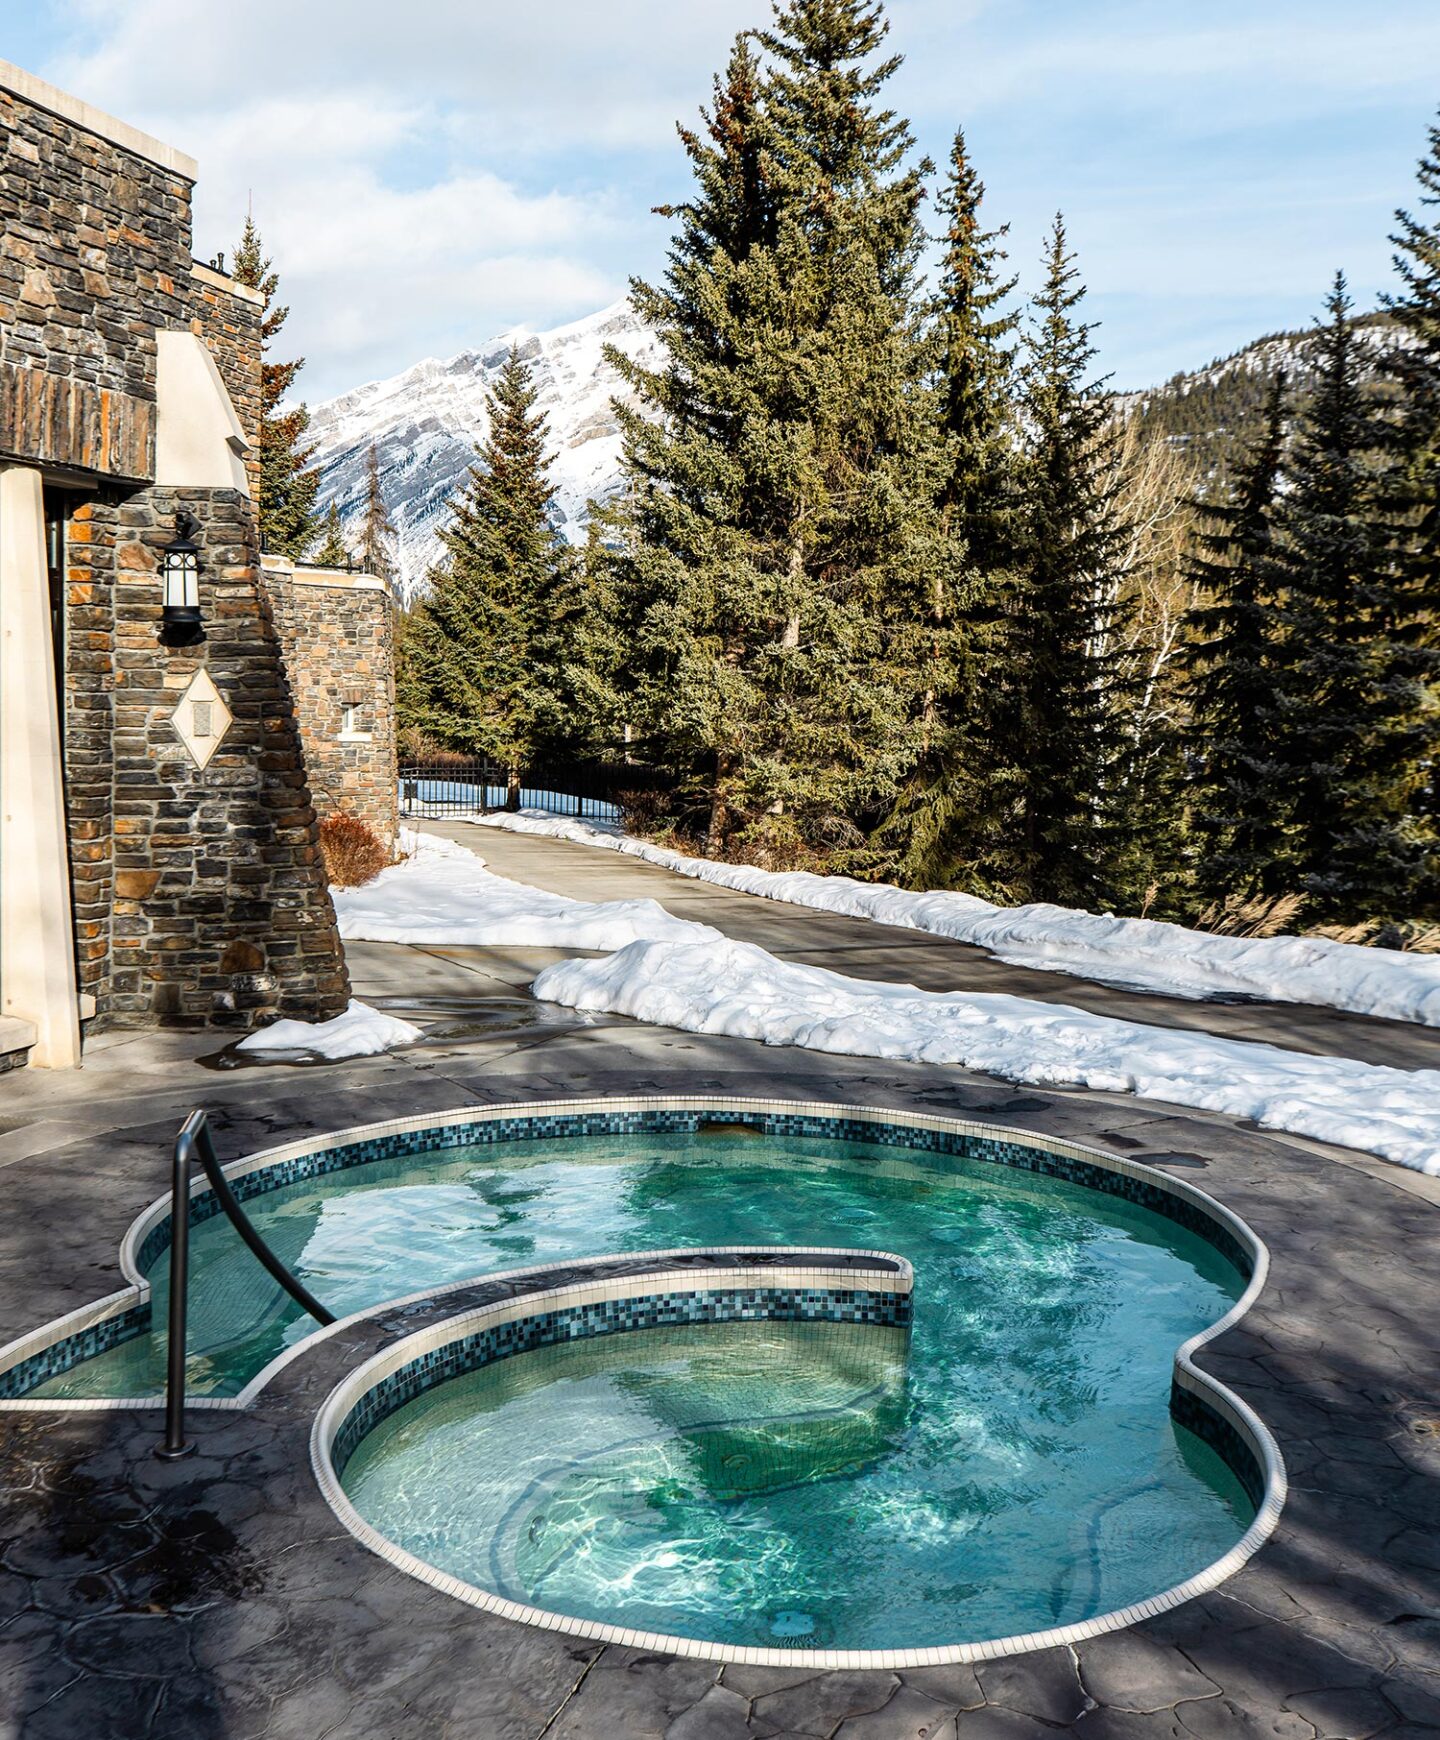 A circle shaped outdoor heated pool, pine trees and snow capped mountains in the background